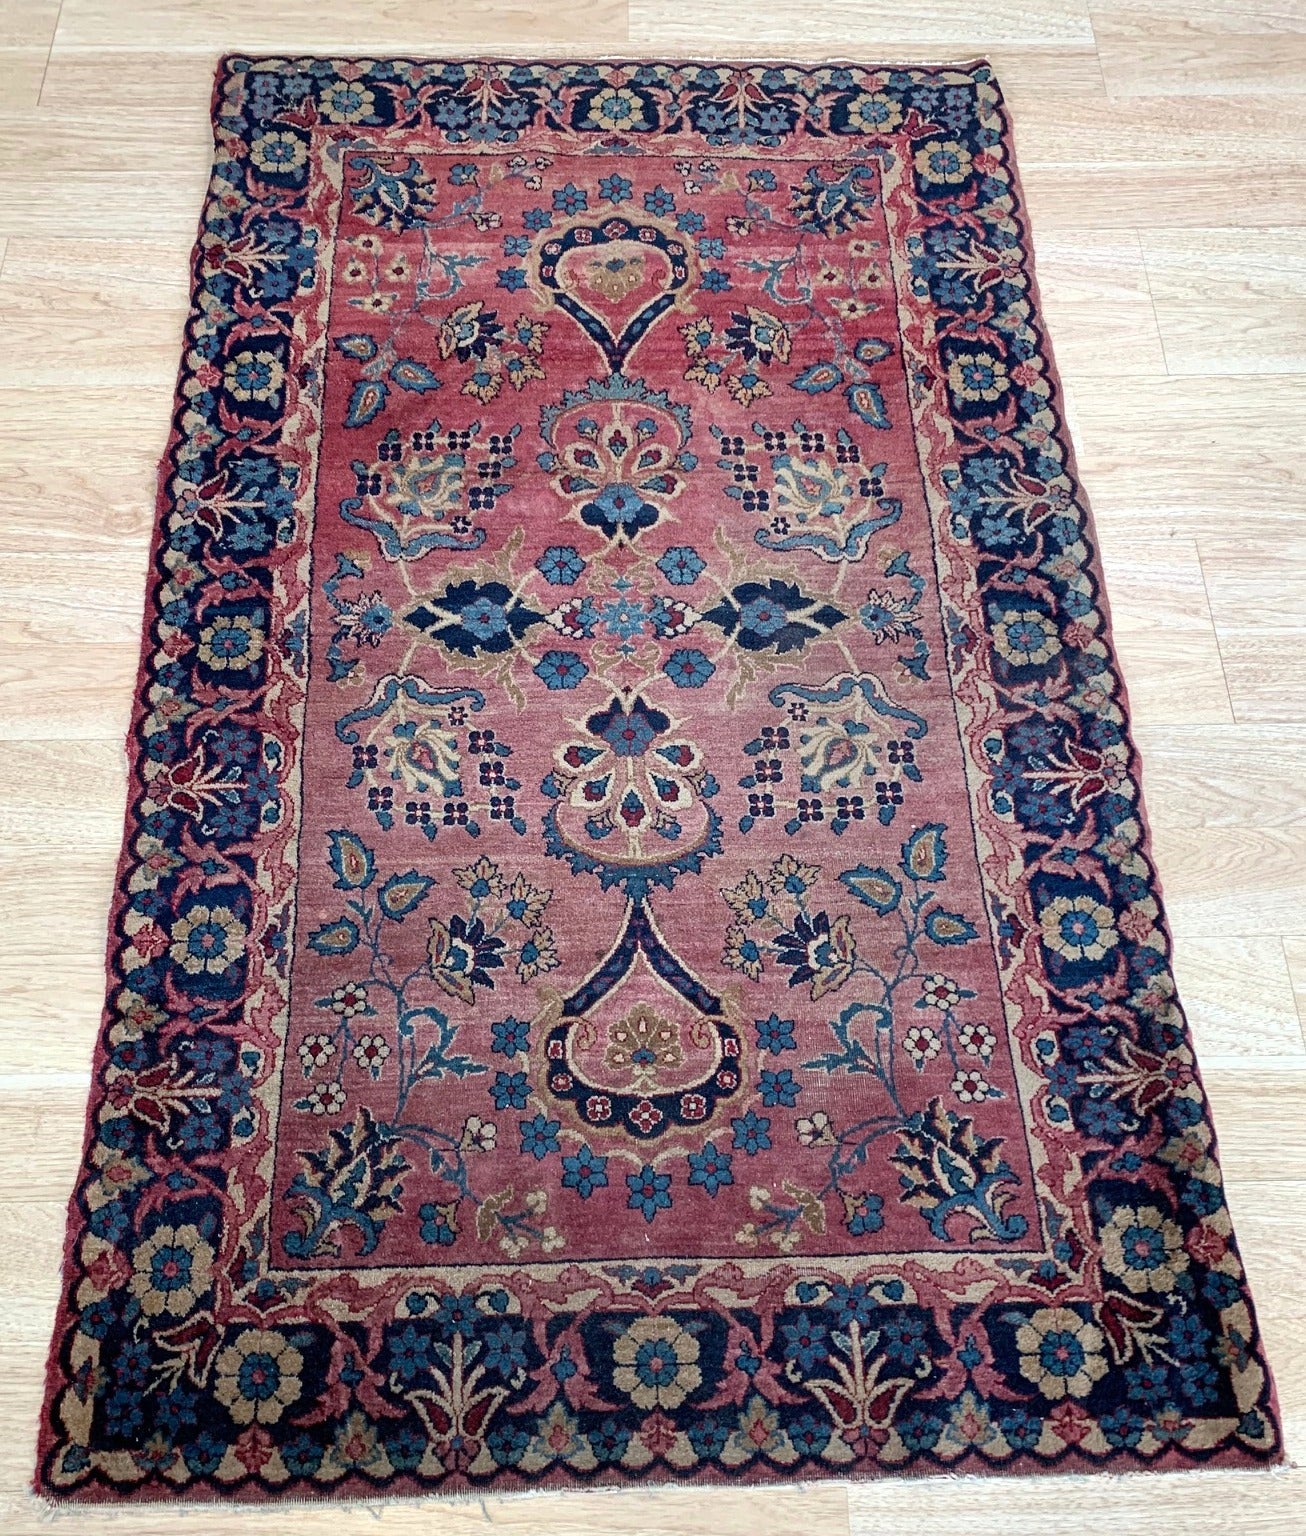 Handmade antique Middle Eastern rug in red and blue shades. The rug is from the beginning of 20th century in original good condition.